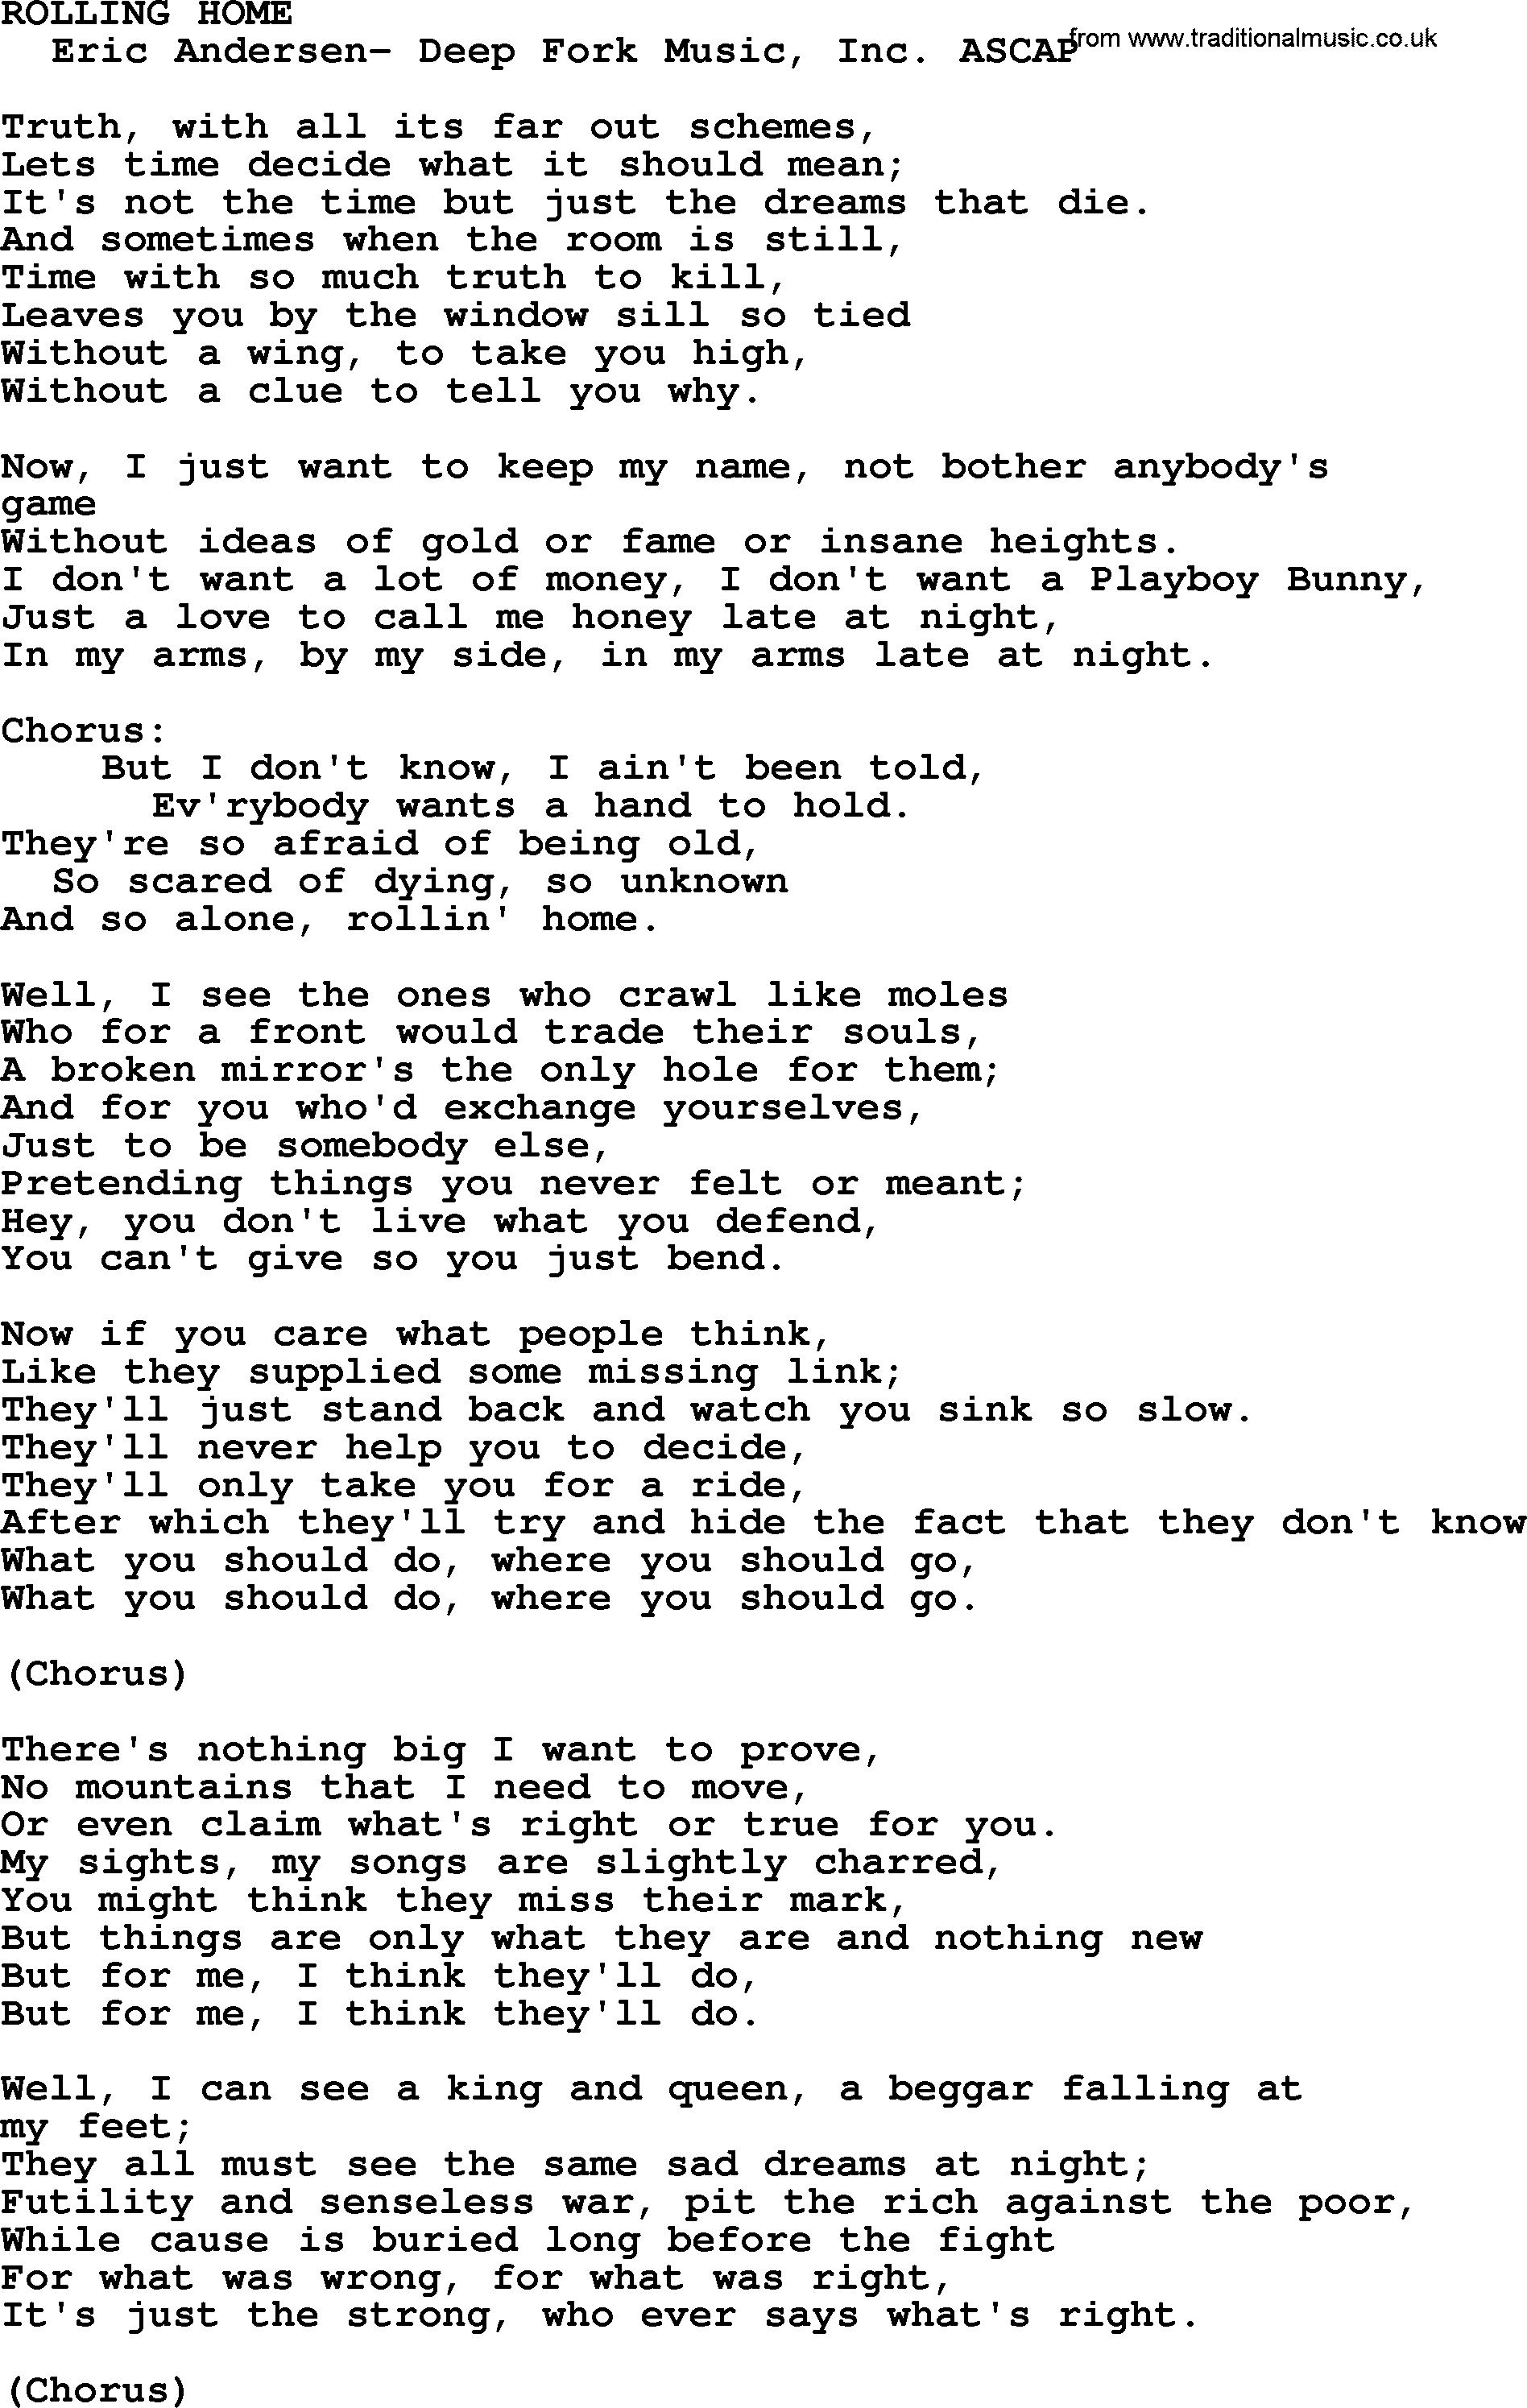 Peter, Paul and Mary song Rolling Home lyrics